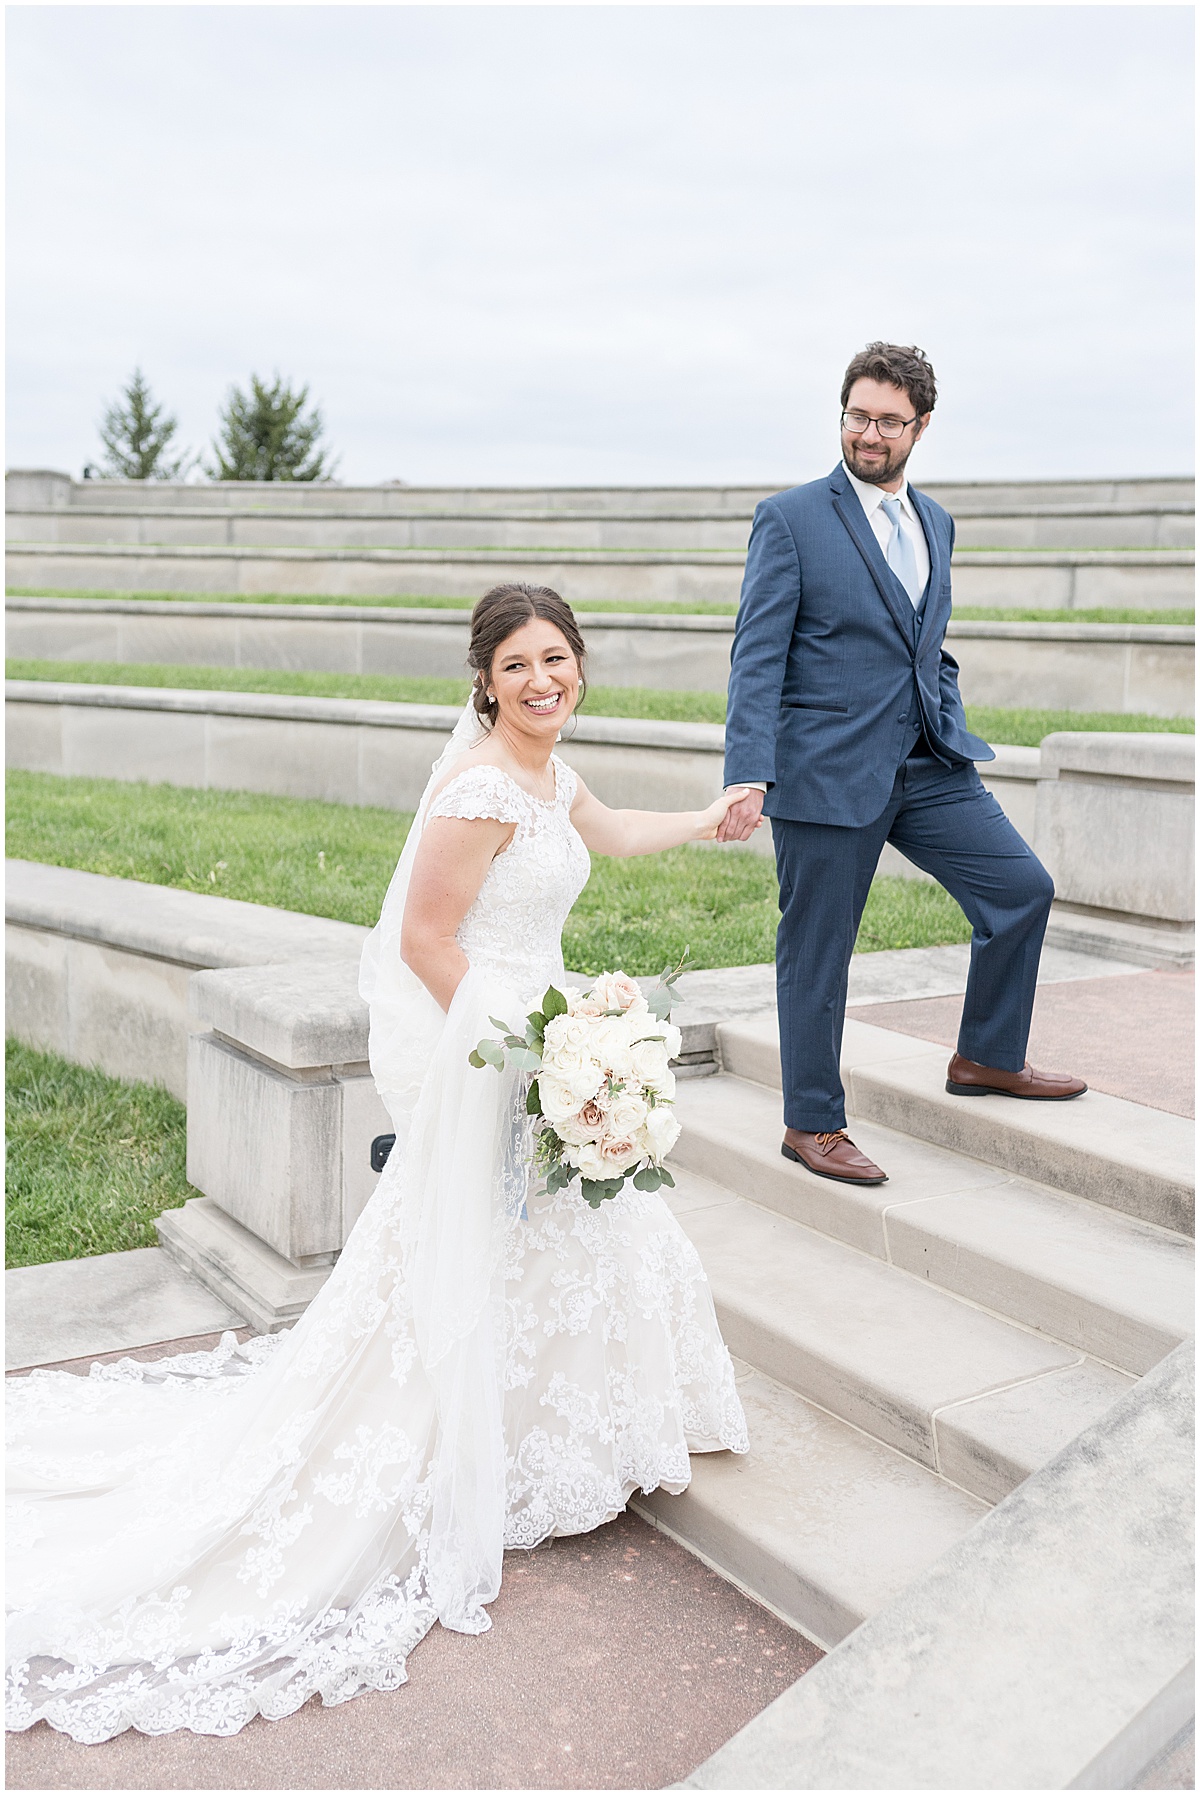 Bride and groom walk on steps during photos at Coxhall Gardens in Carmel, Indiana